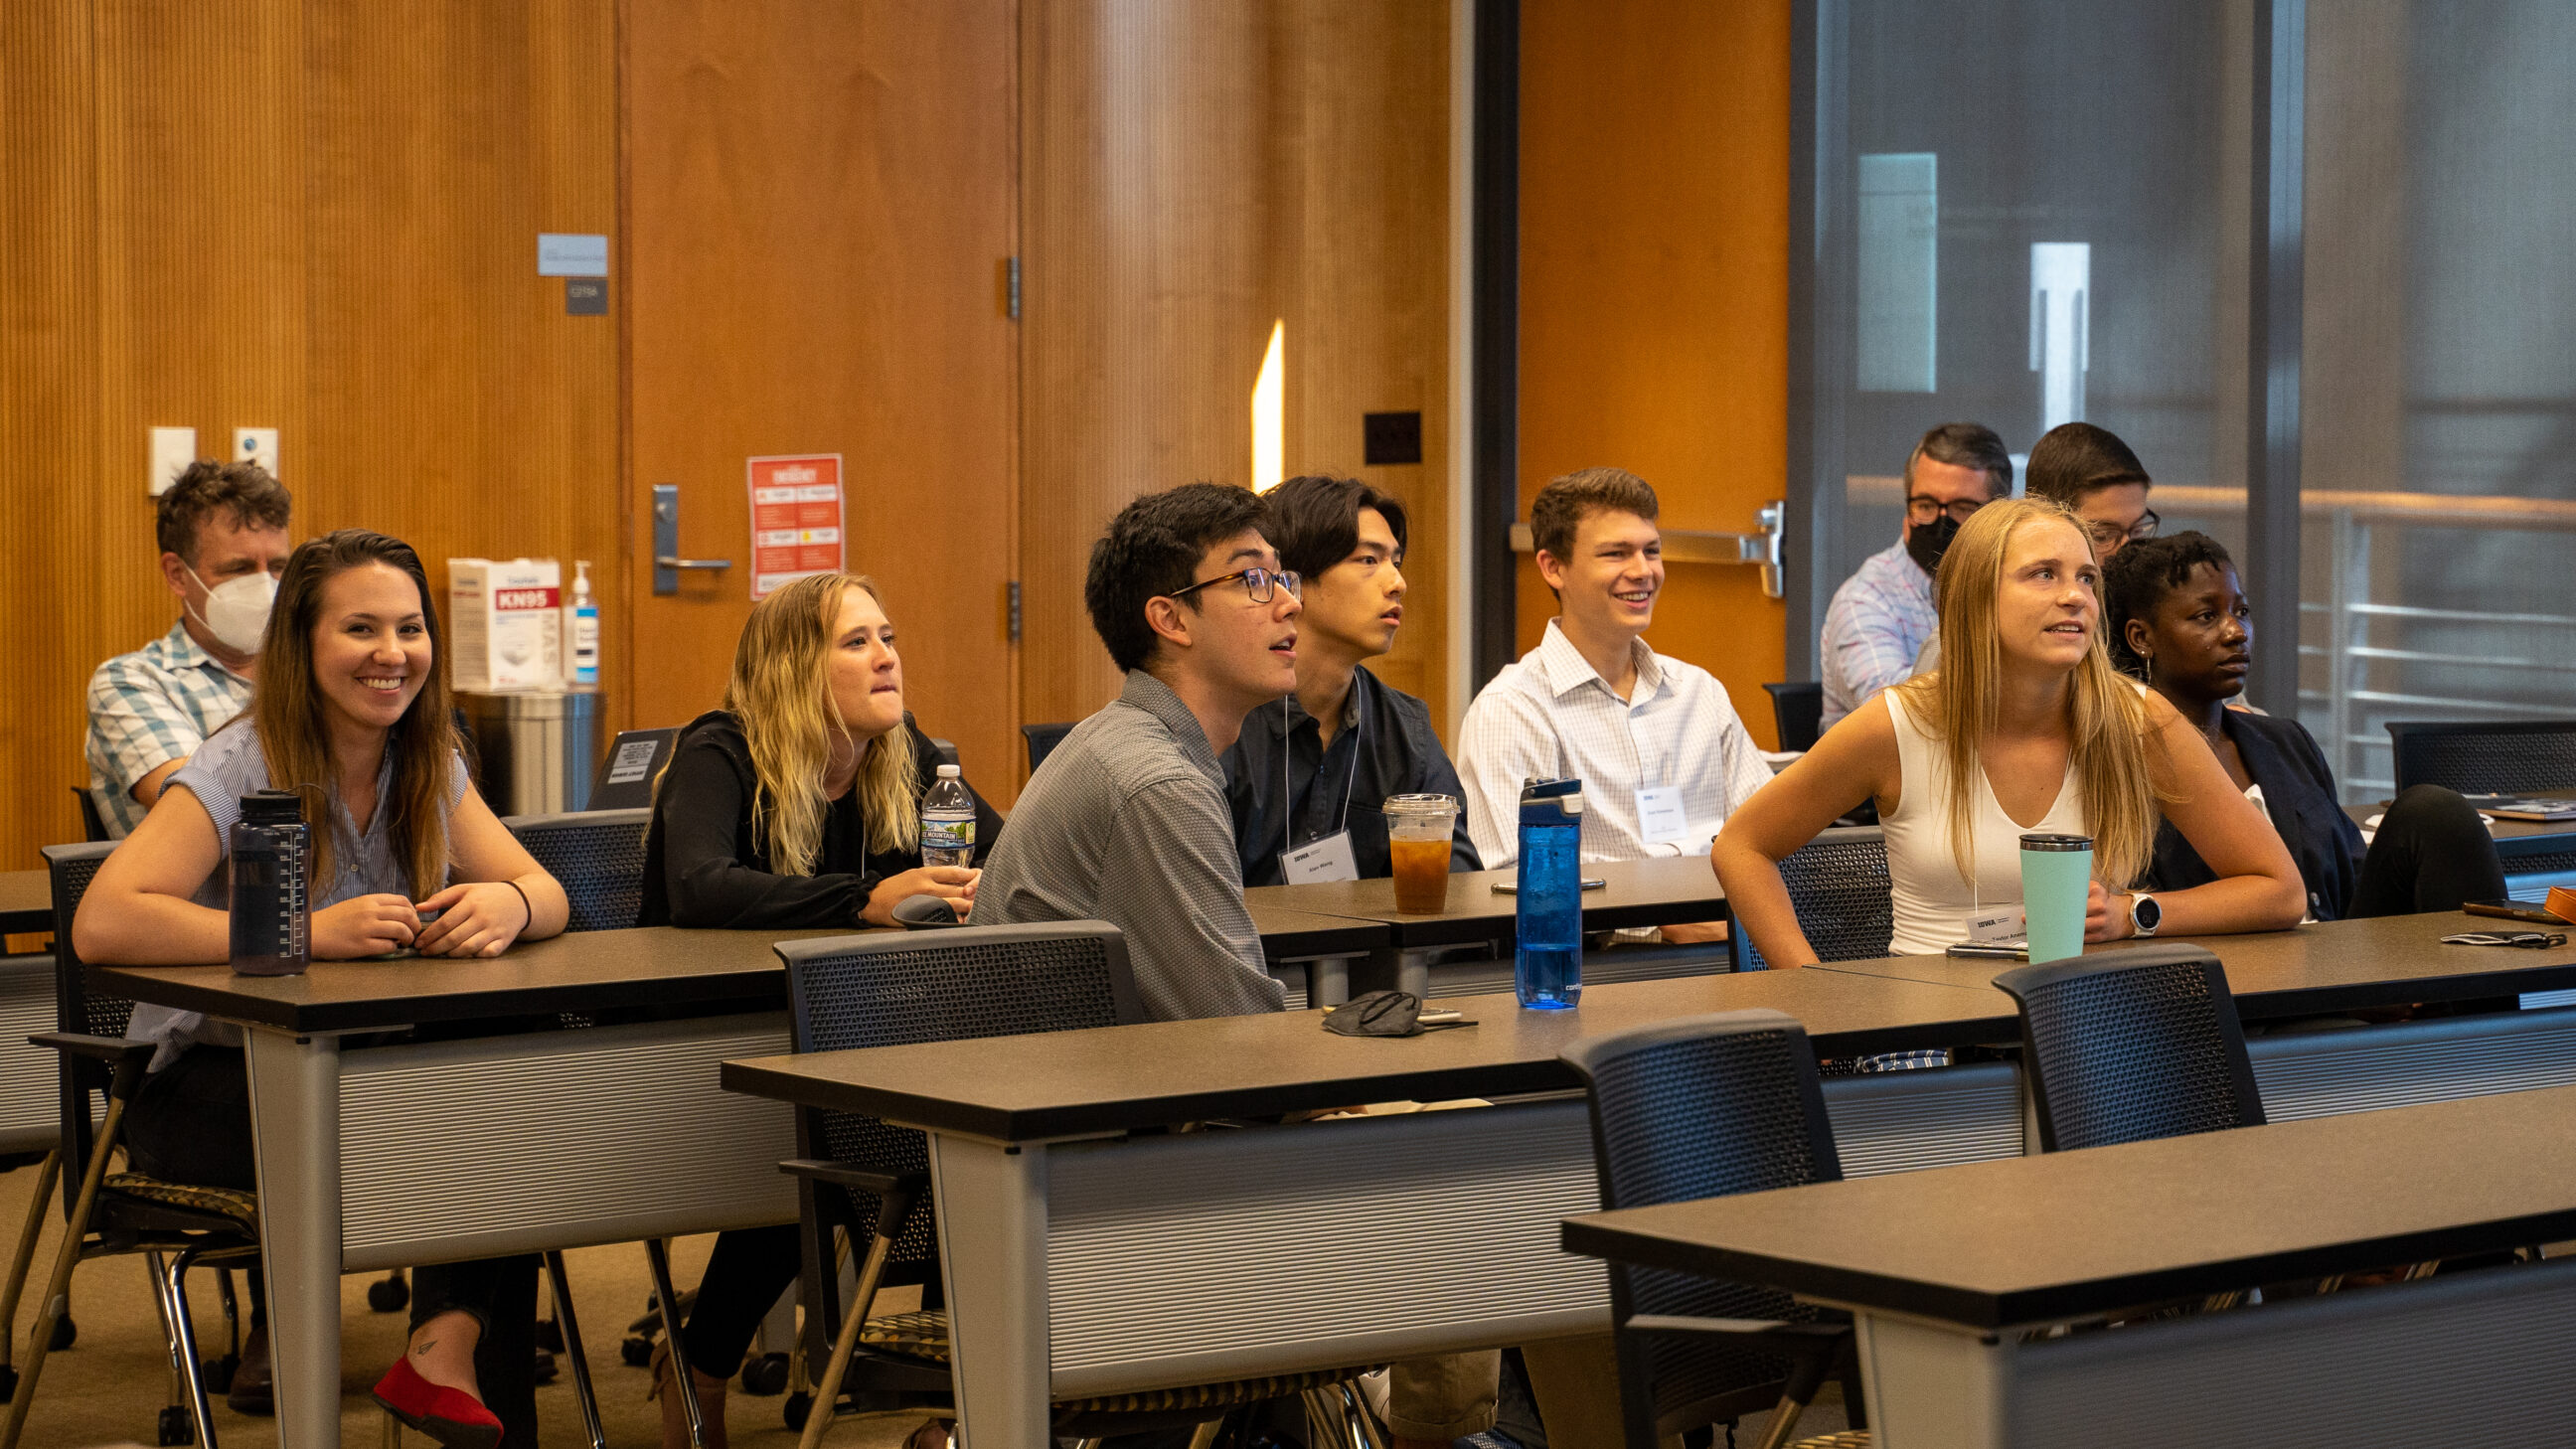 Students laughing during the 2022 Iowa Summer Institute in Biostatistics